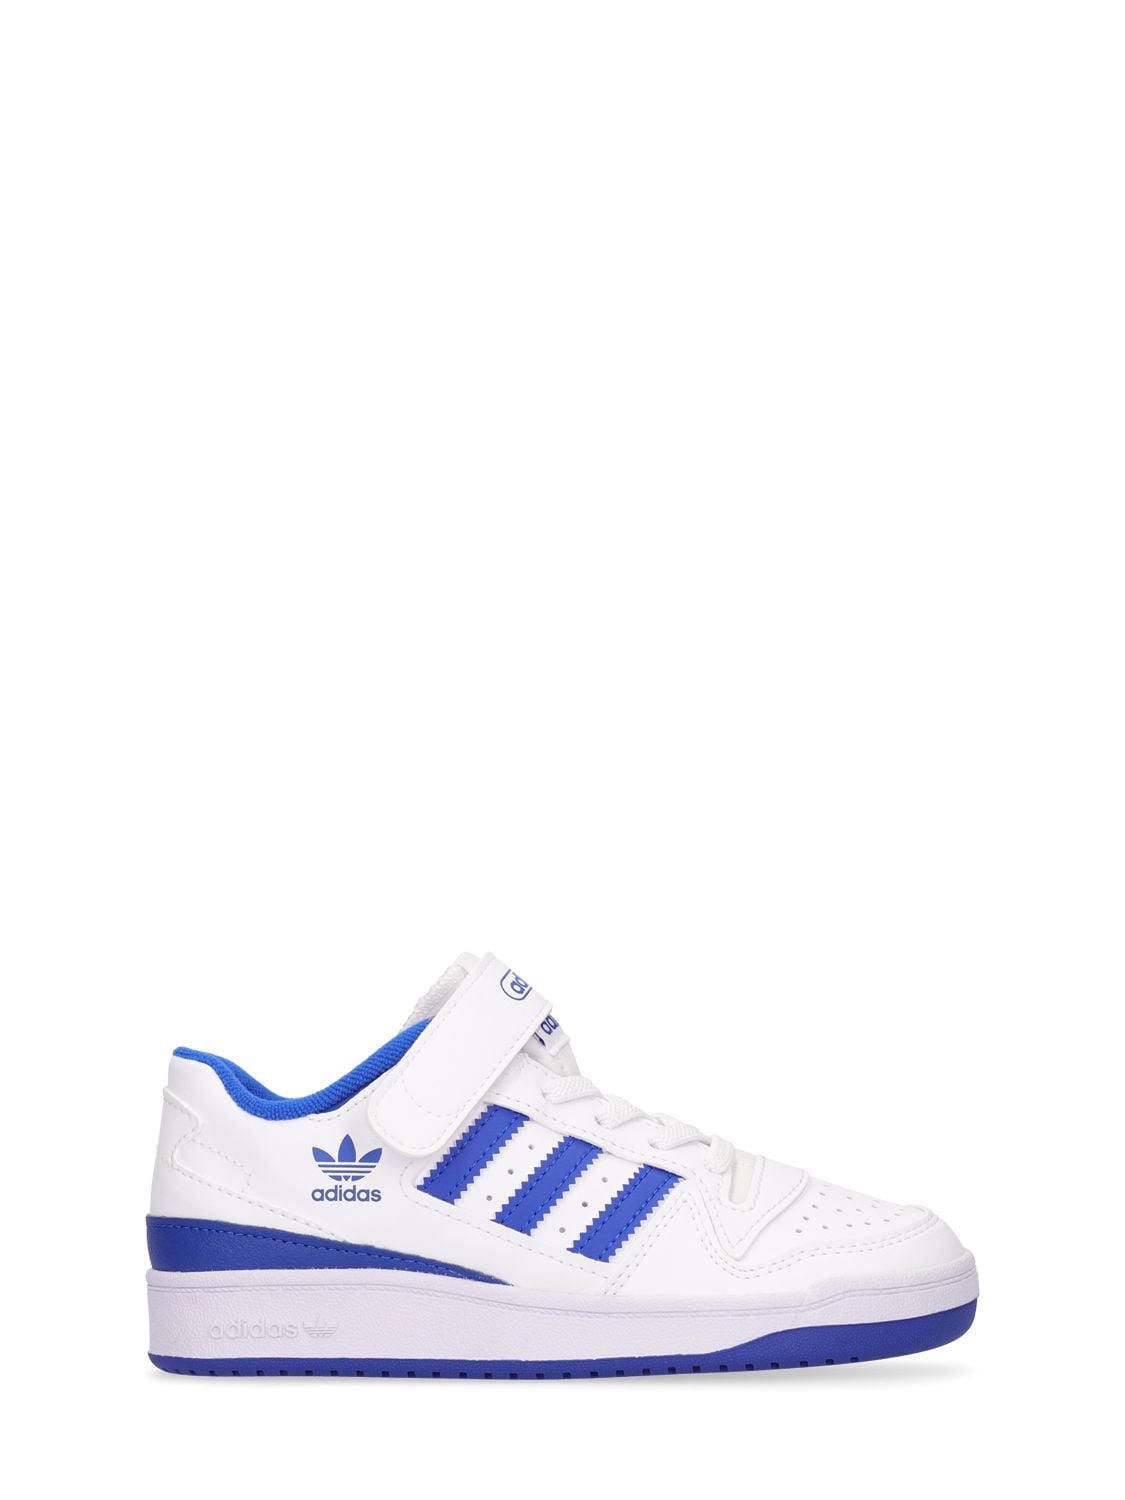 ADIDAS ORIGINALS FORUM FAUX LEATHER LOW LACE-UP SNEAKERS